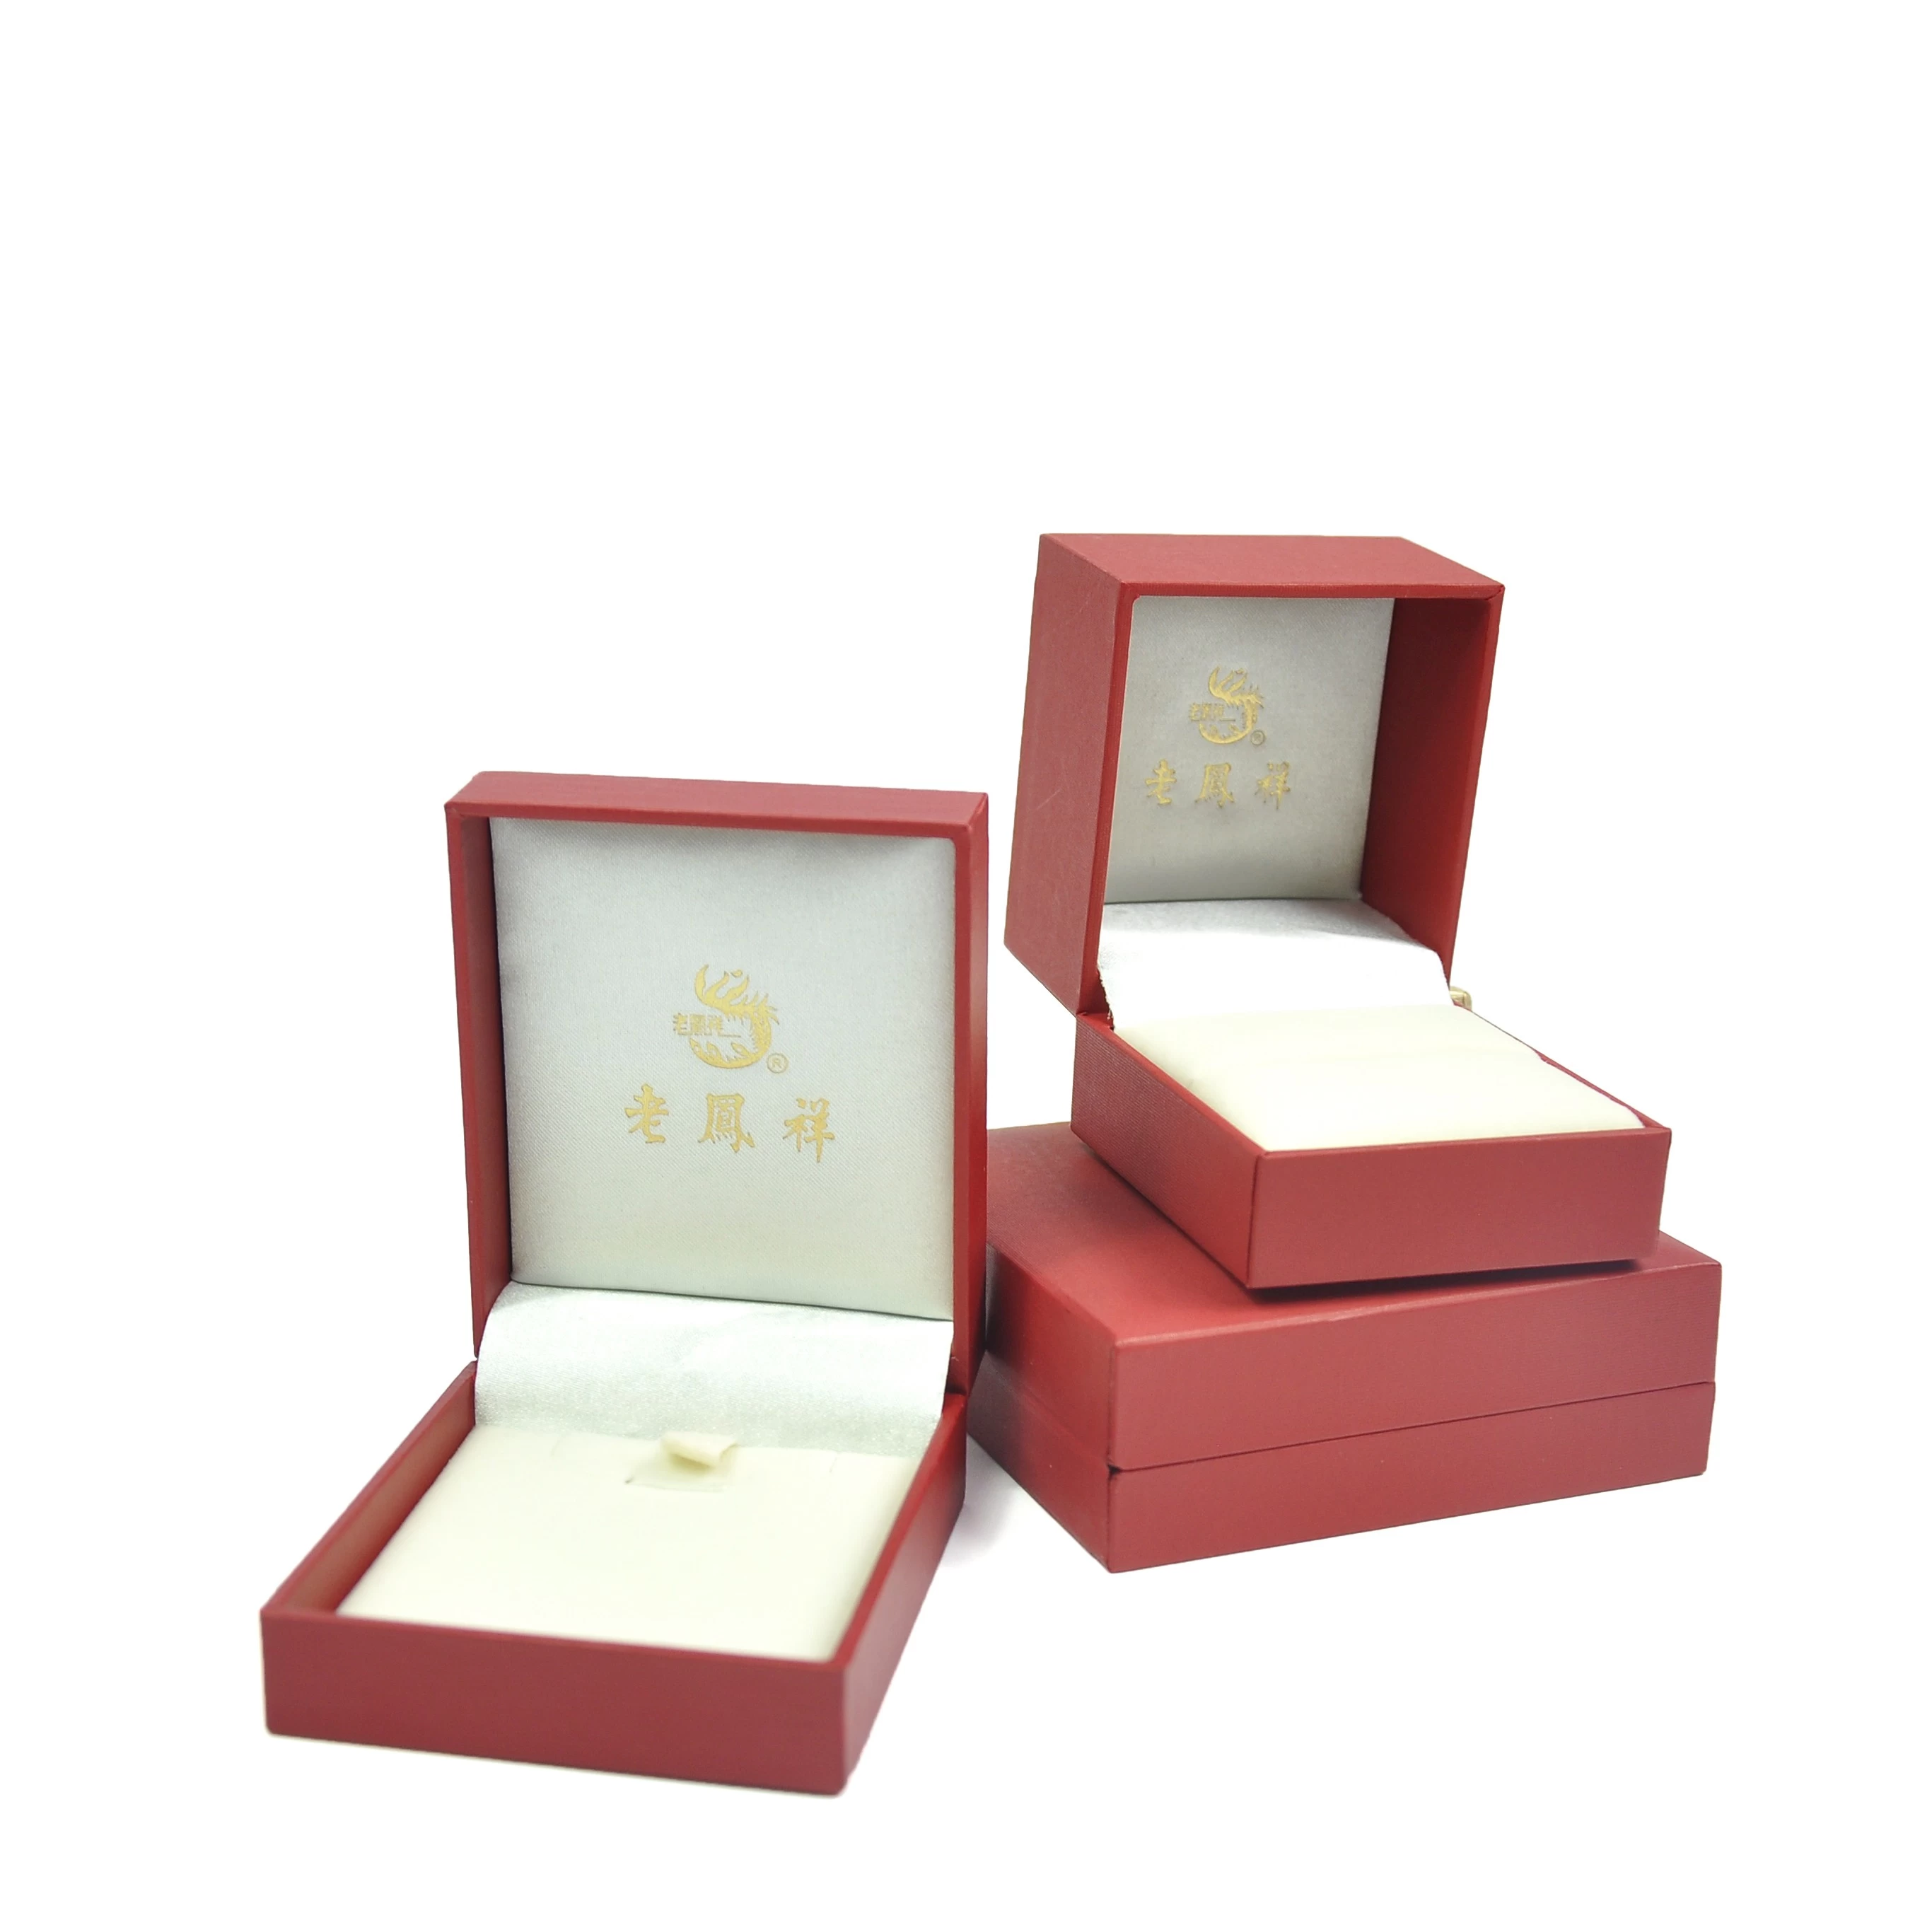 Yadao Stock Red Box for Jewelry Store Accessories Exhibition Jewelry Plastic Box